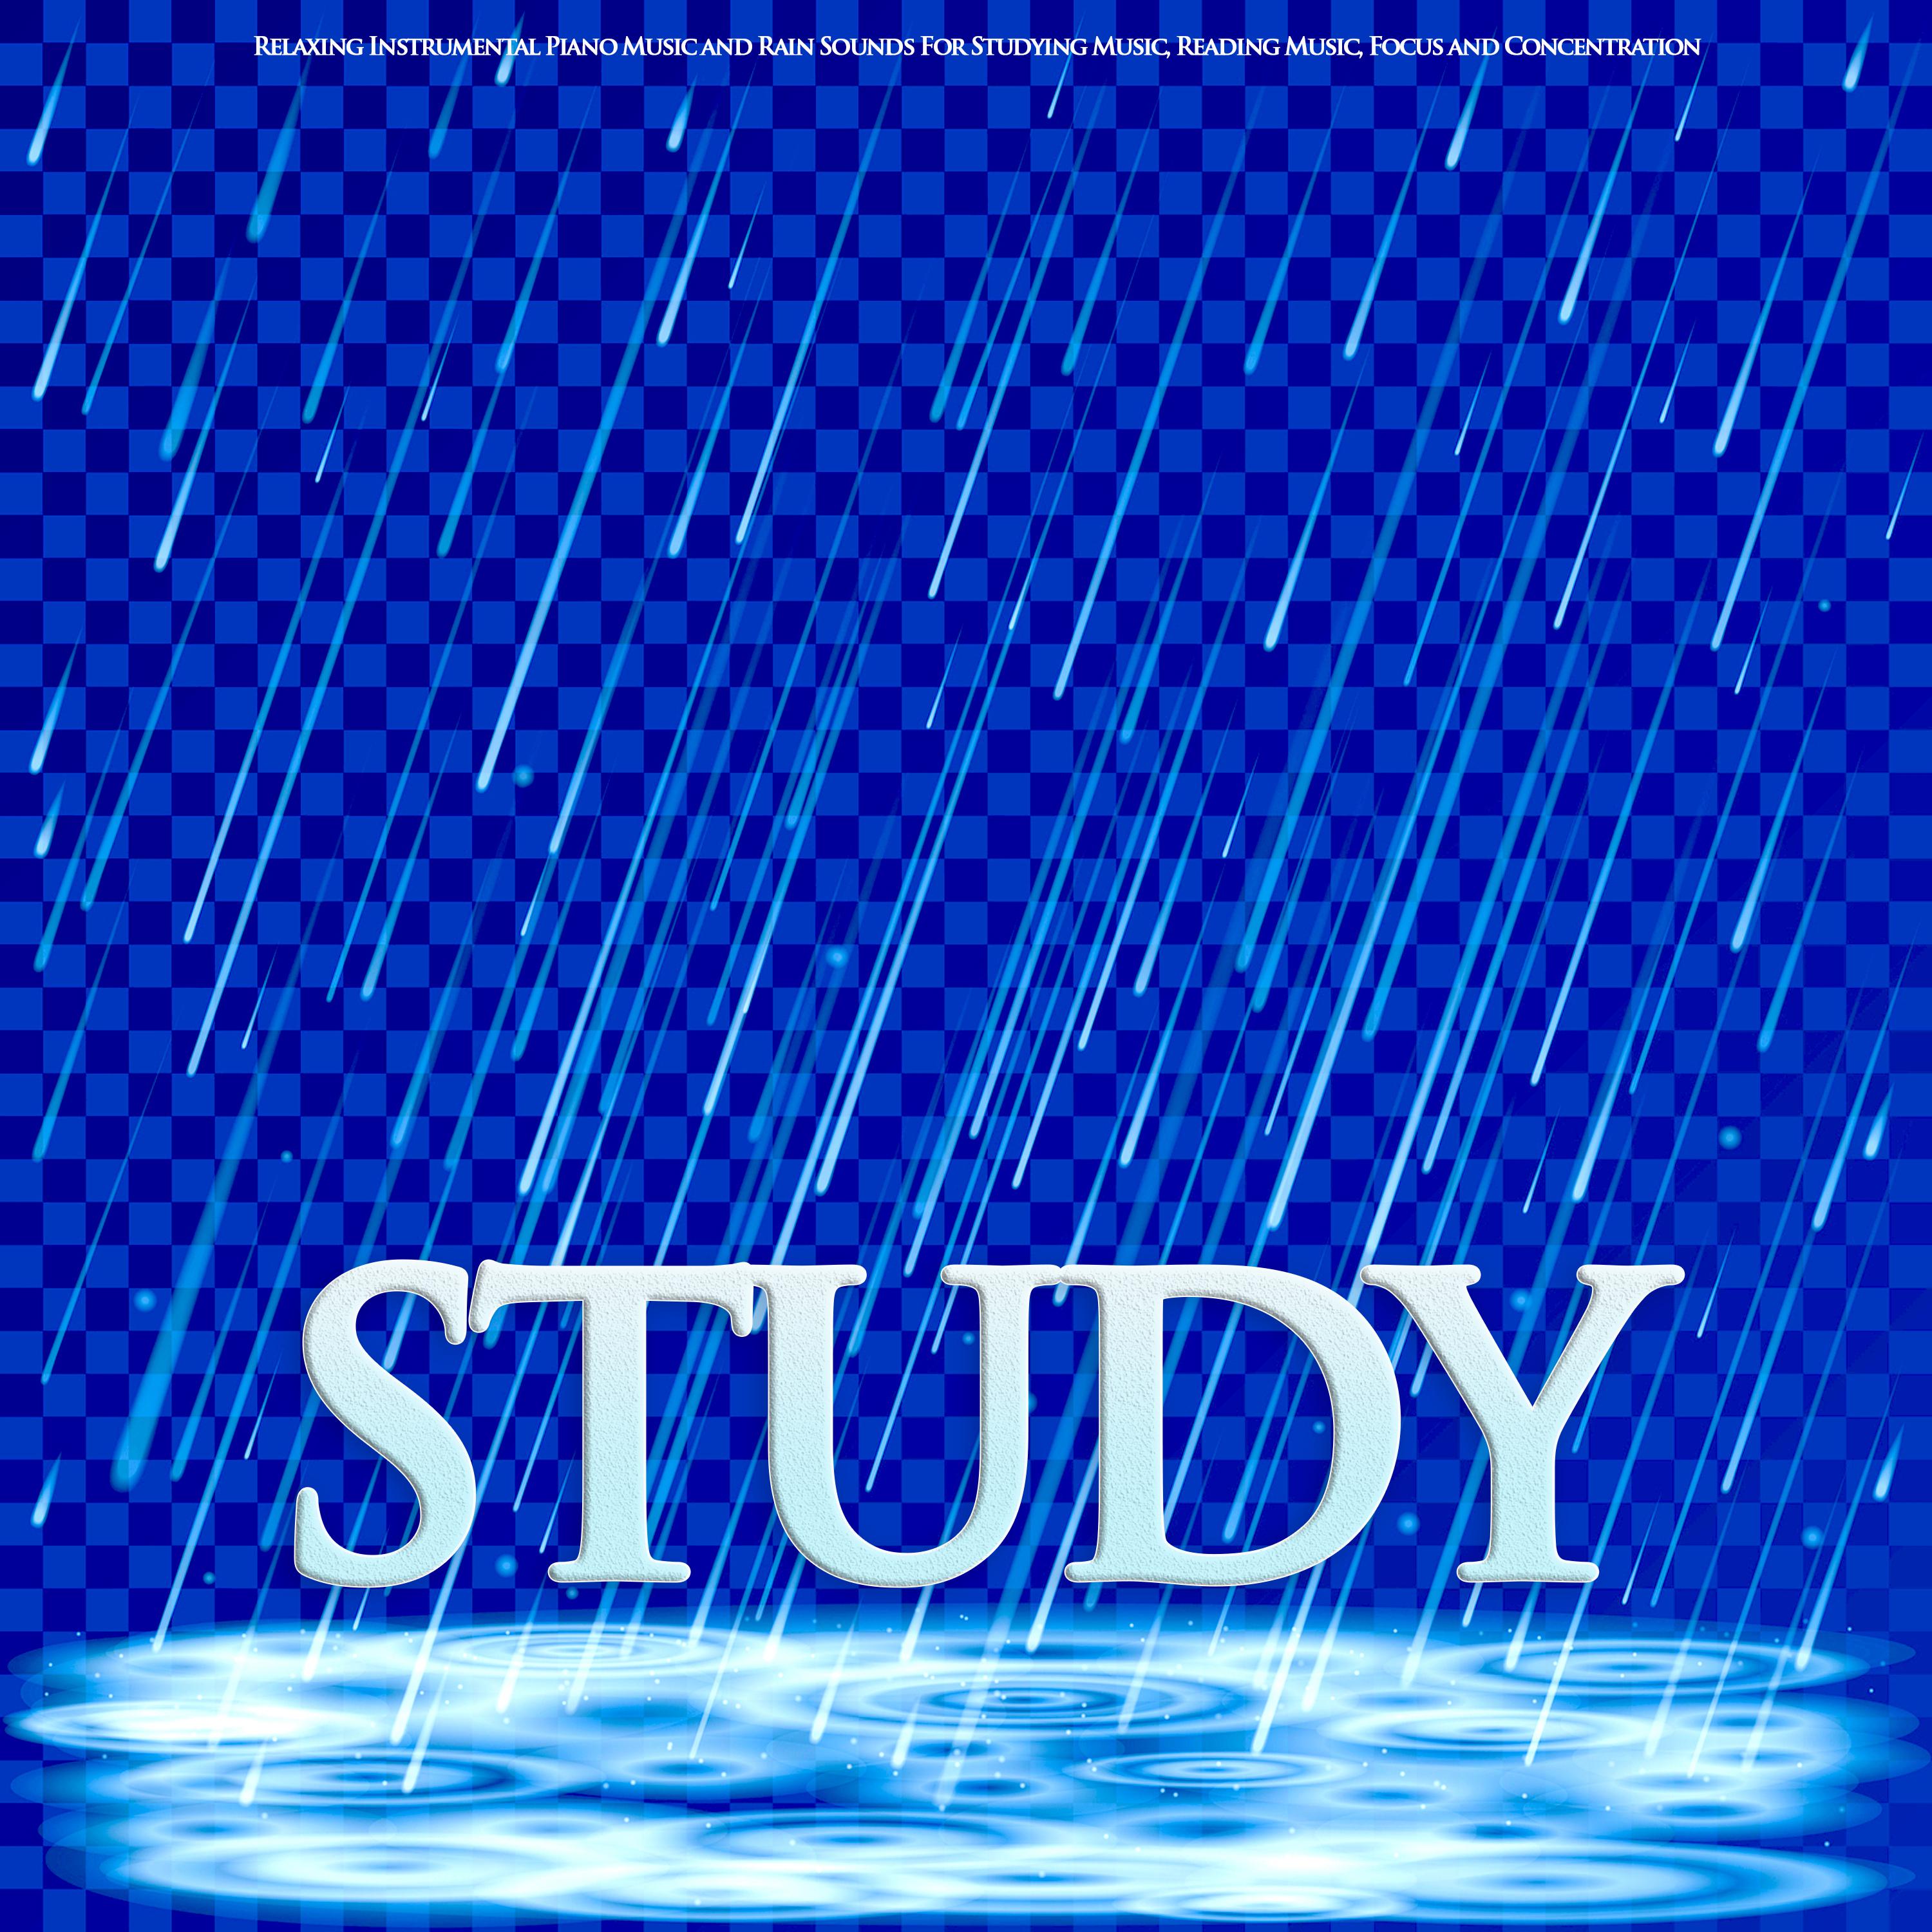 Study: Relaxing Instrumental Piano Music and Rain Sounds For Studying Music, Reading Music, Focus and Concentration